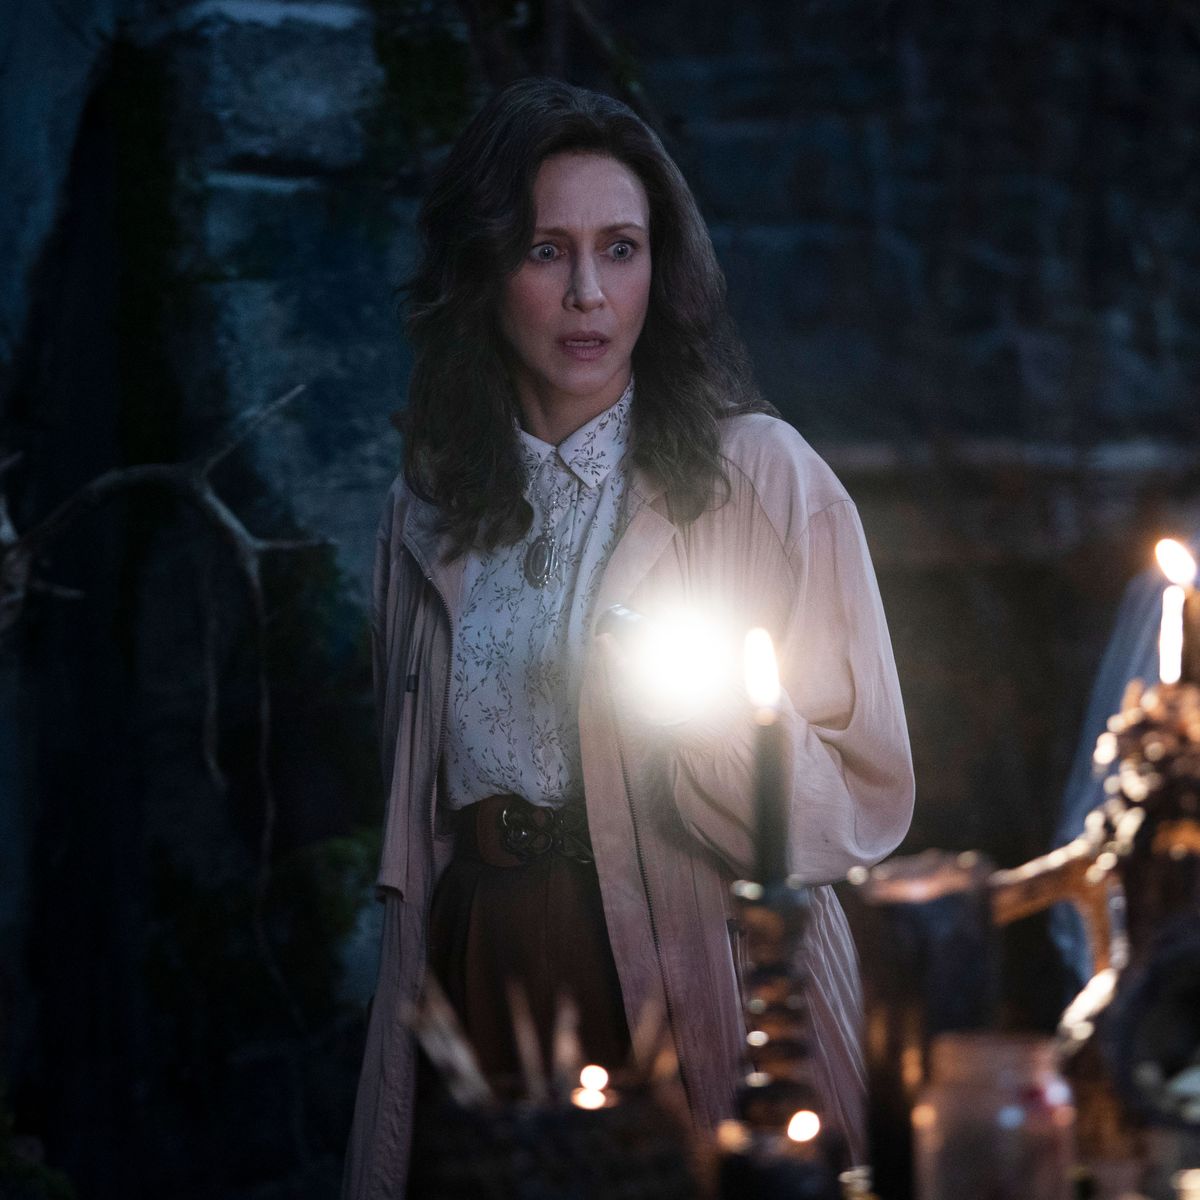 the conjuring 2 full movie online with english subtitles